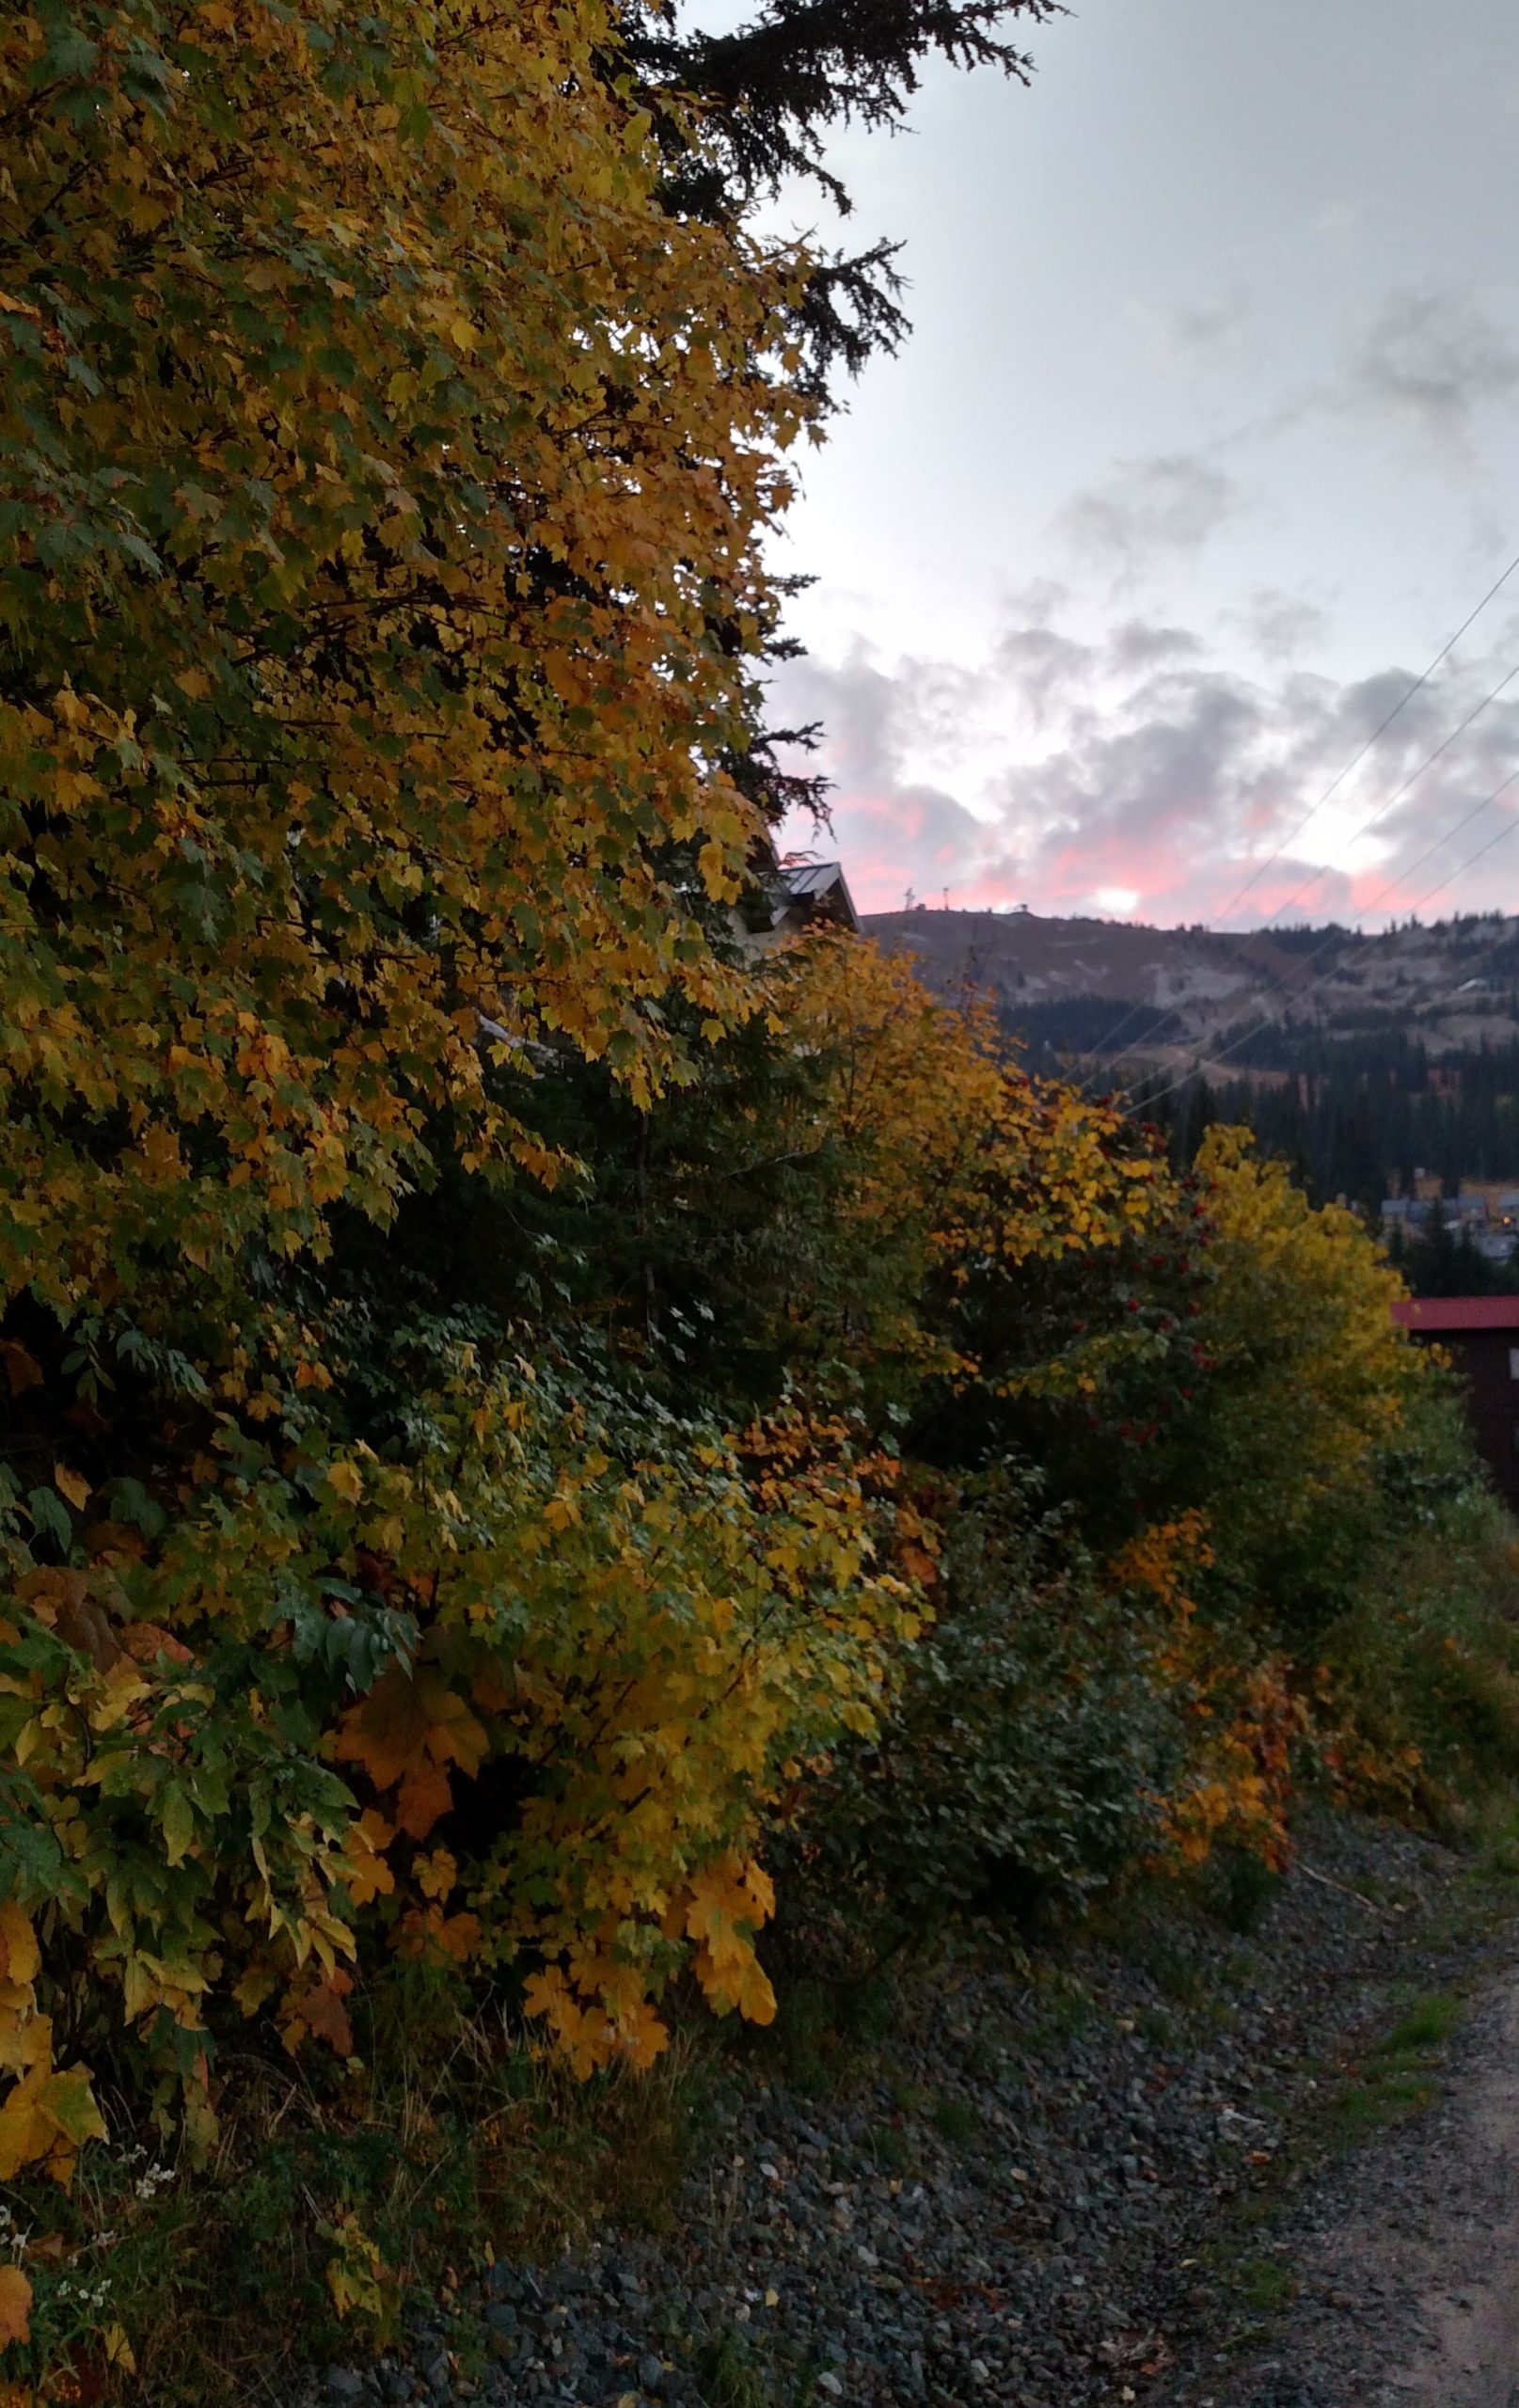 view of a mountain at sunset with golden fall colors in the foreground